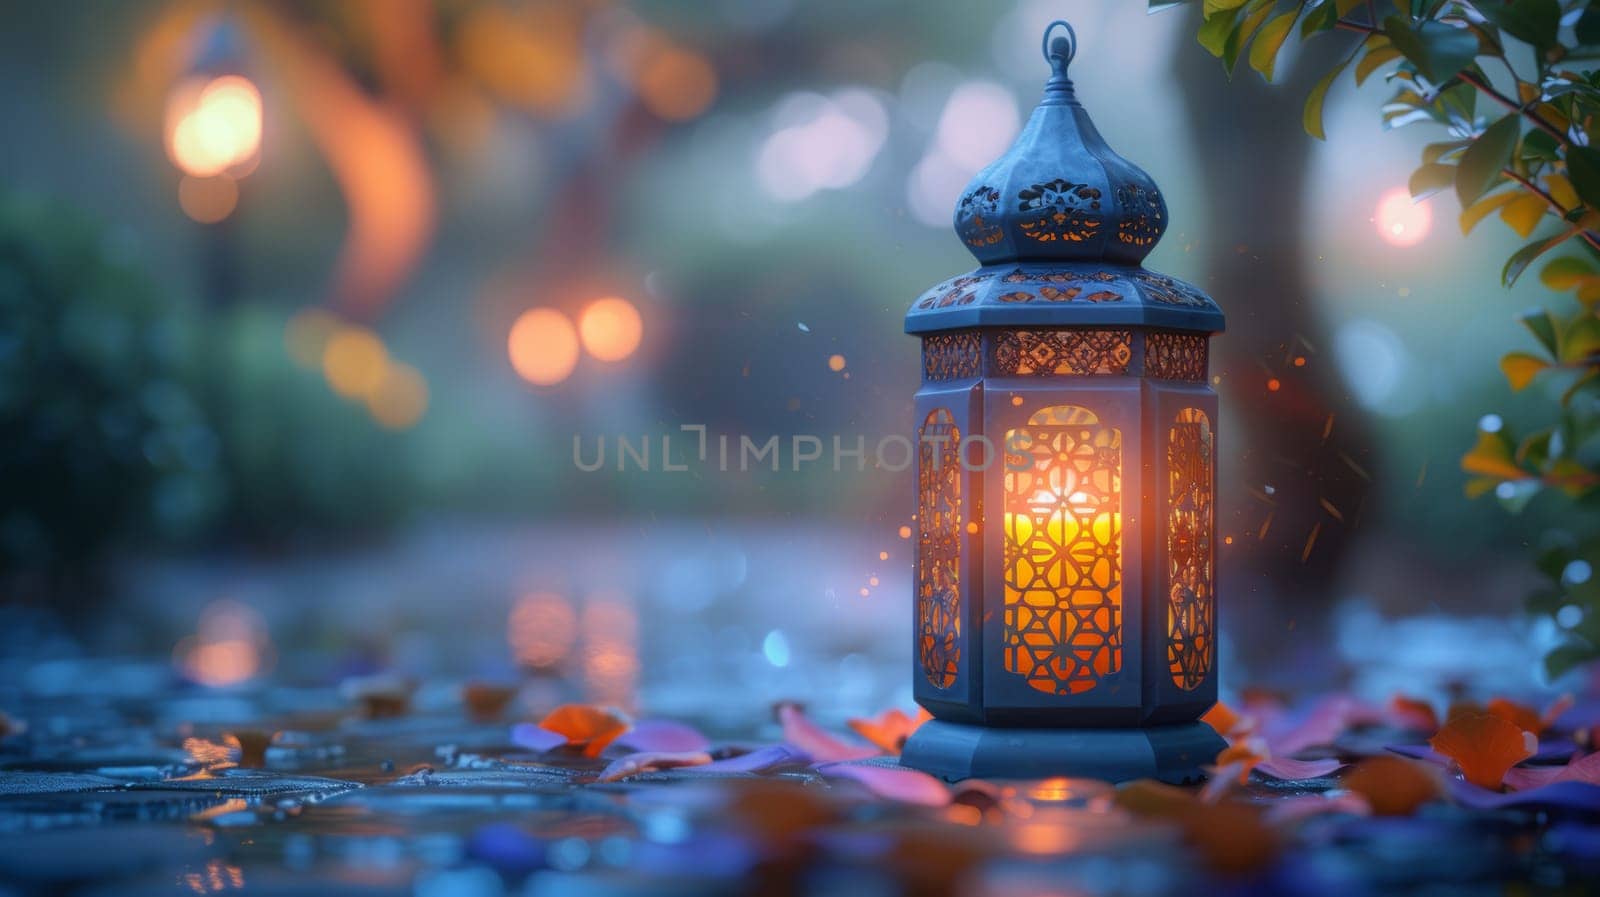 Inviting you to the Muslim holy month of Ramadan Kareem with an ornamental Arabic lantern and a burning candle.